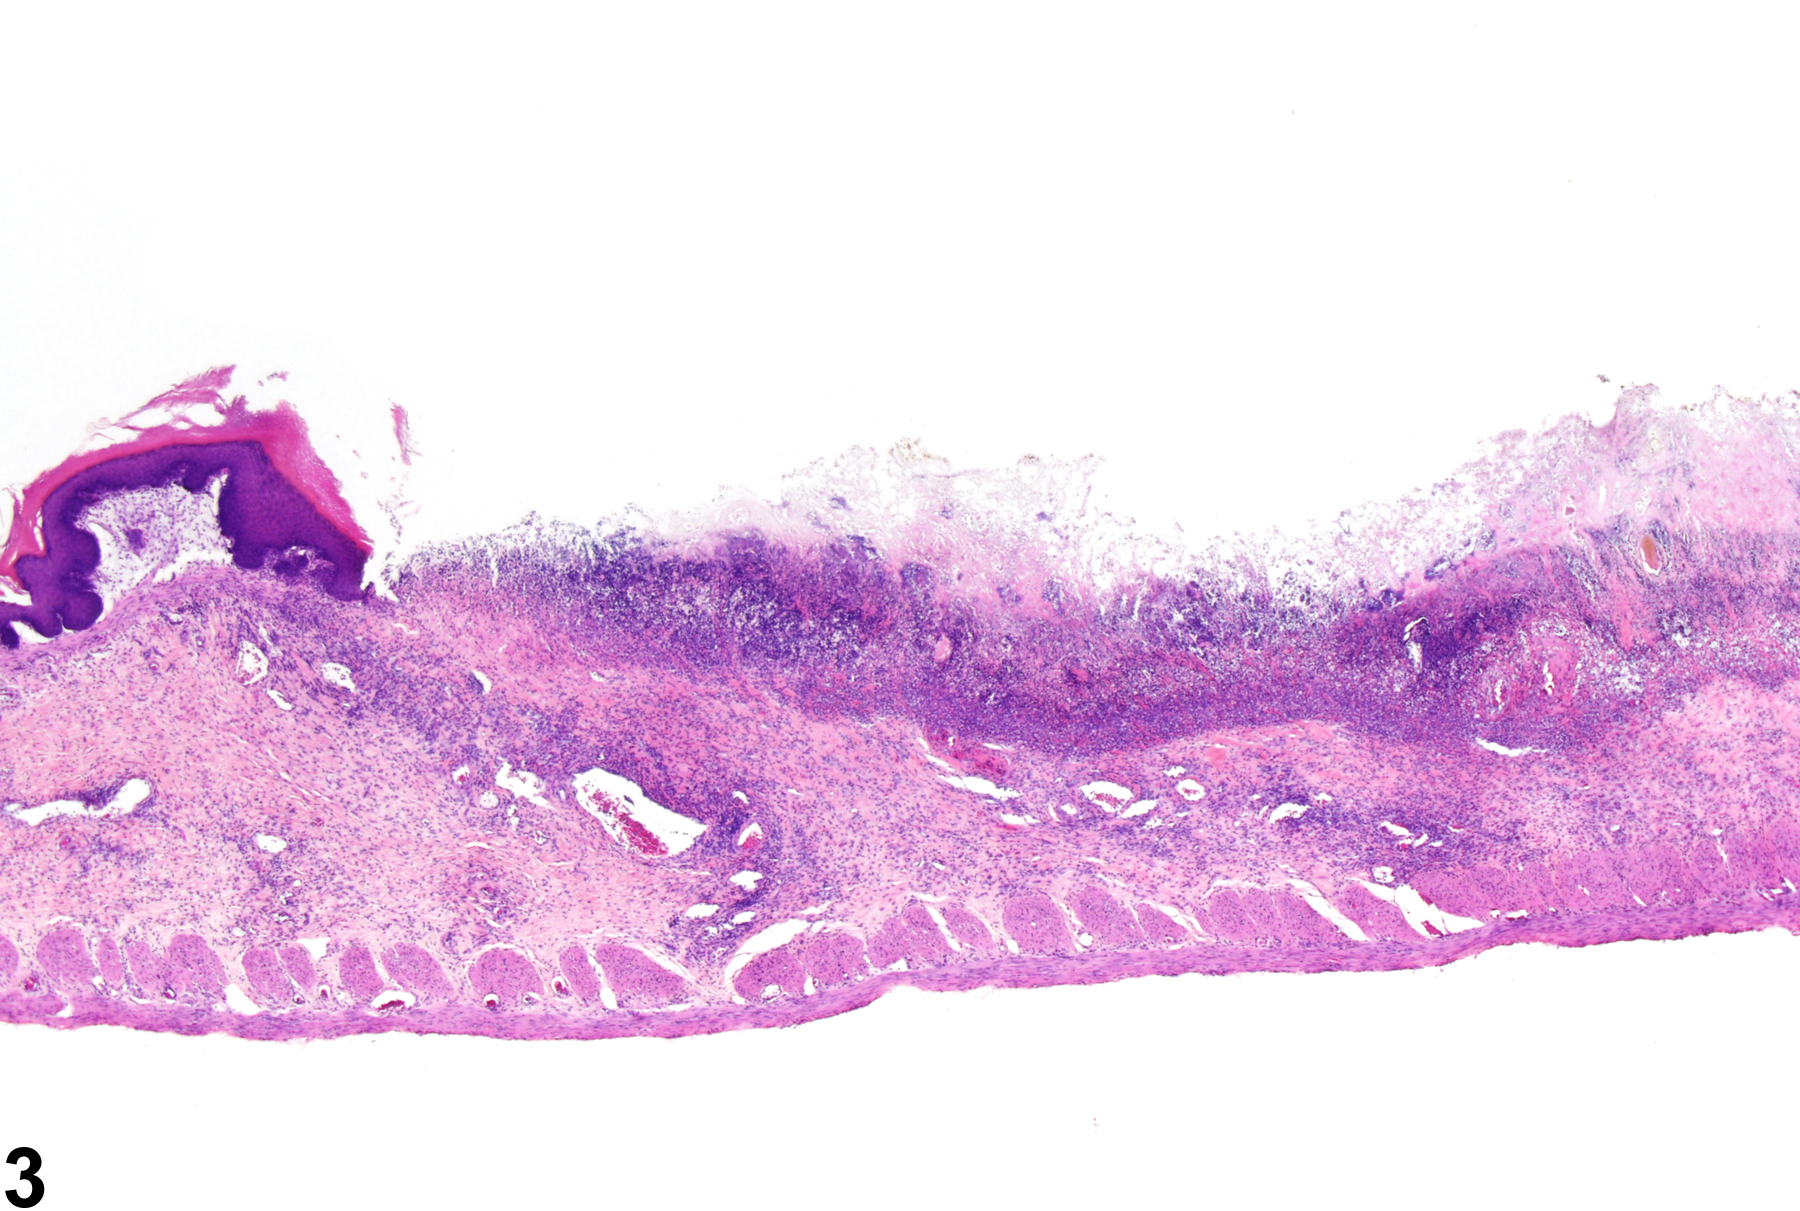 Image of ulcer in the forestomach from a male F344/N rat in a chronic study